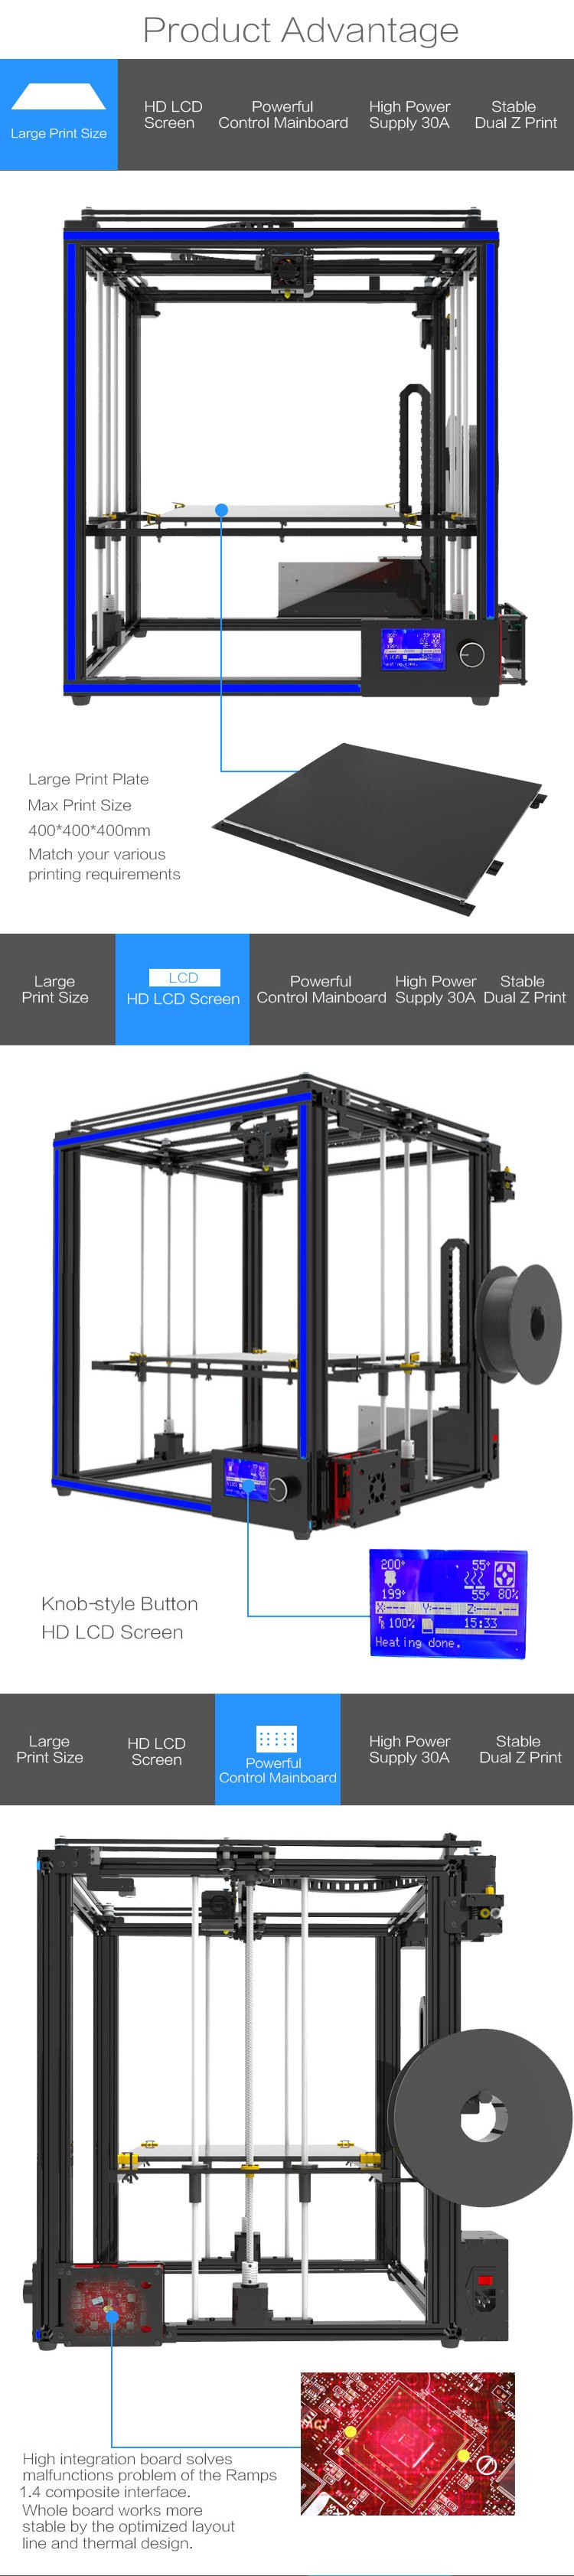 TRONXY® X5S-400 DIY Aluminum 3D Printer Kit 400*400*400mm Large Printing Size With Dual Z-axis Rod/HD LCD Screen/Double Fan 1.75mm 0.4mm Nozzle 6